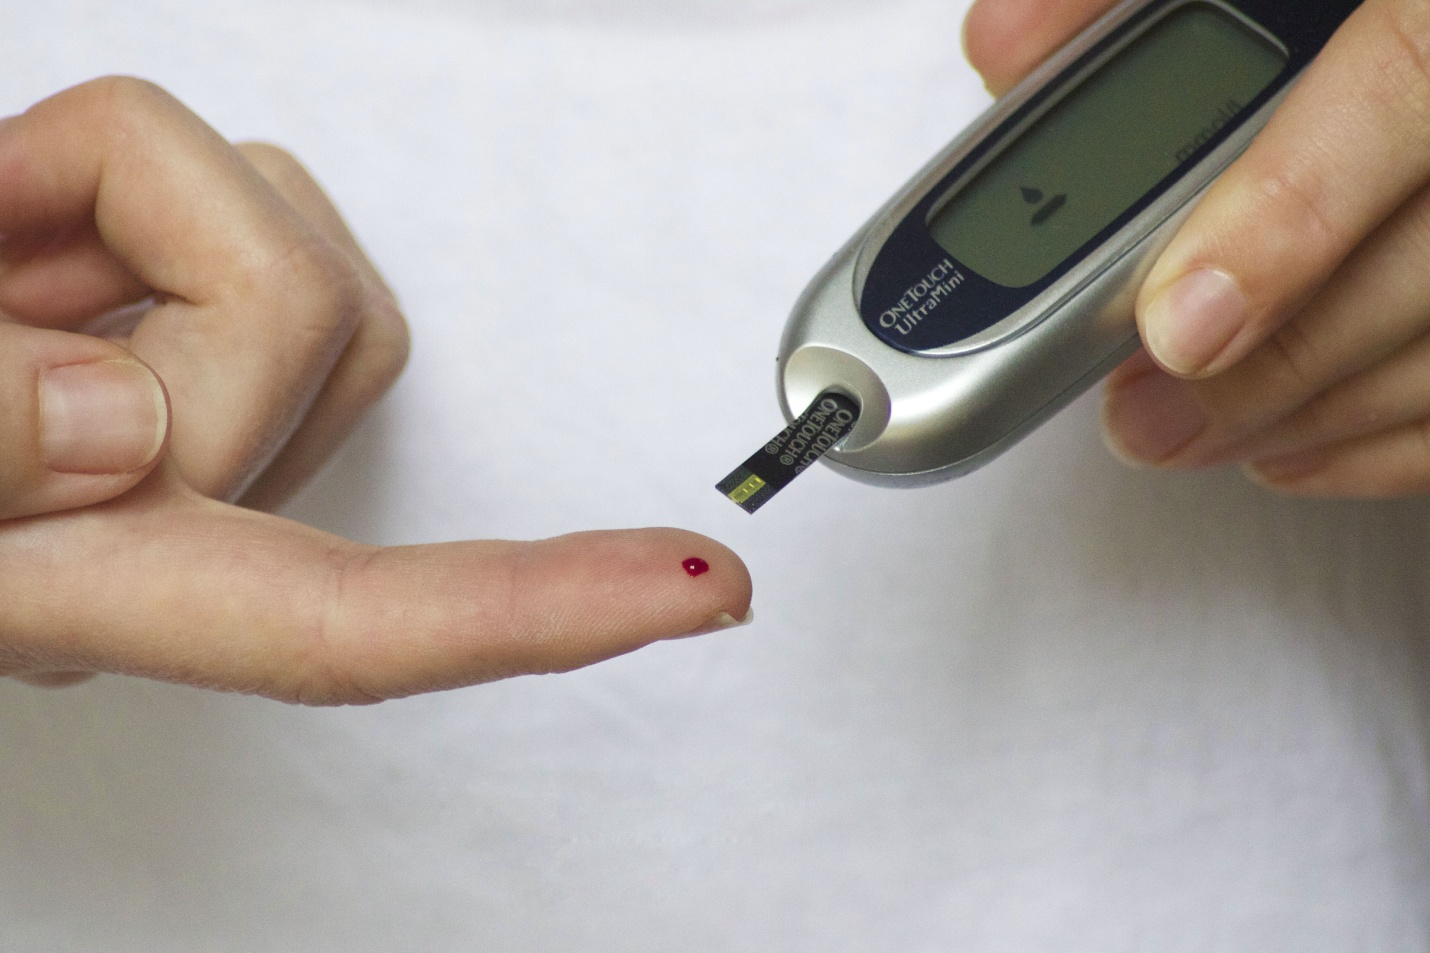 Checking blood sugar level using a glucometer